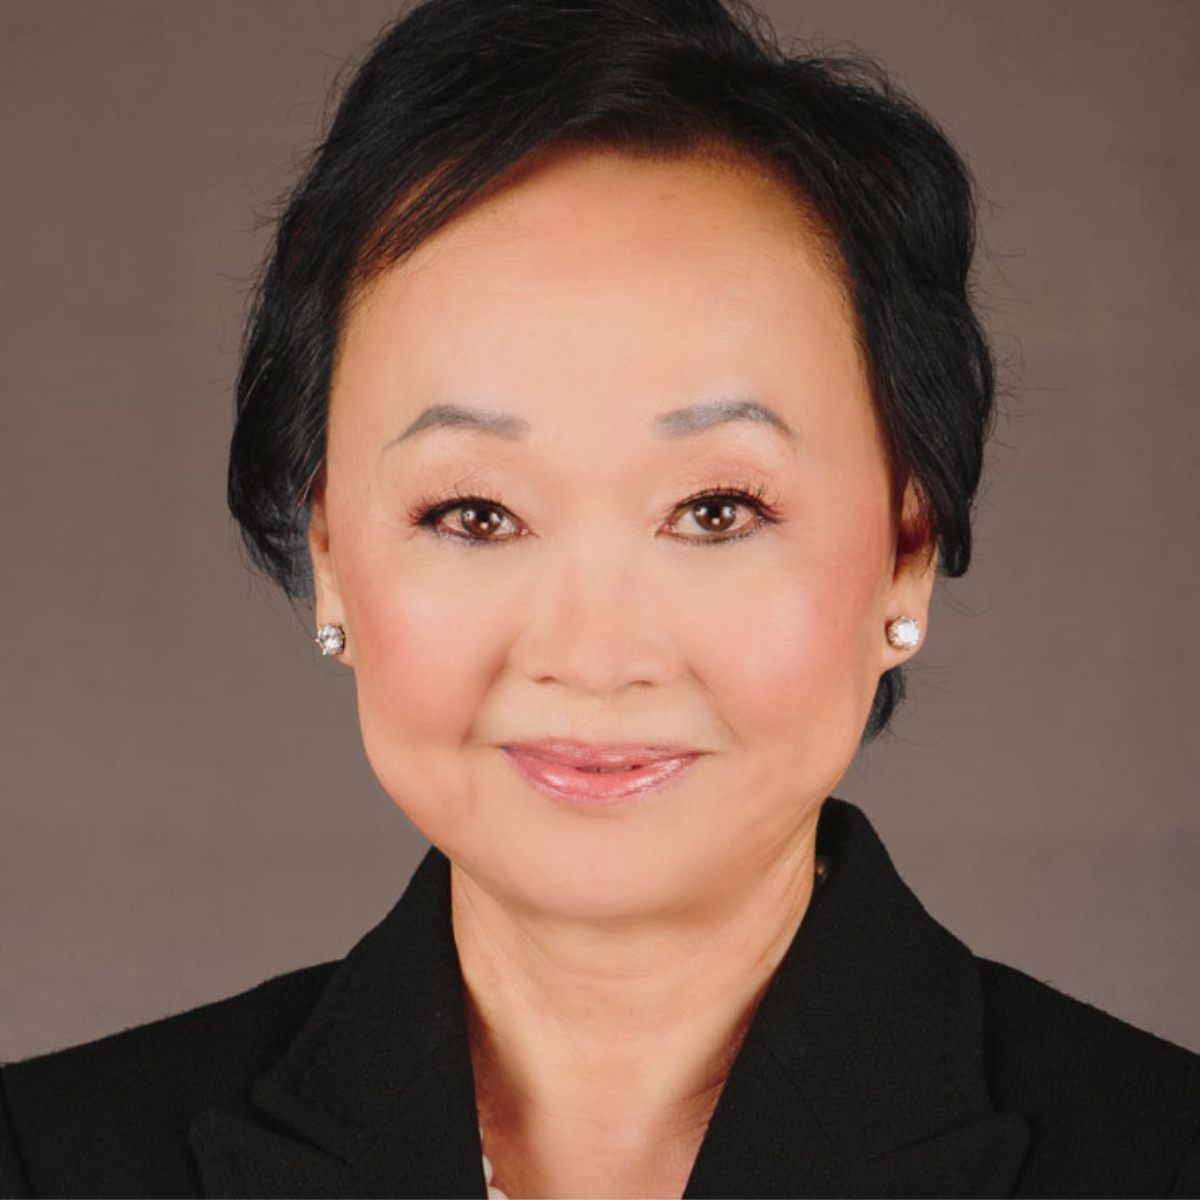 Peggy Cherng Co-Founder and Co-CEO Panda Restaurant Group